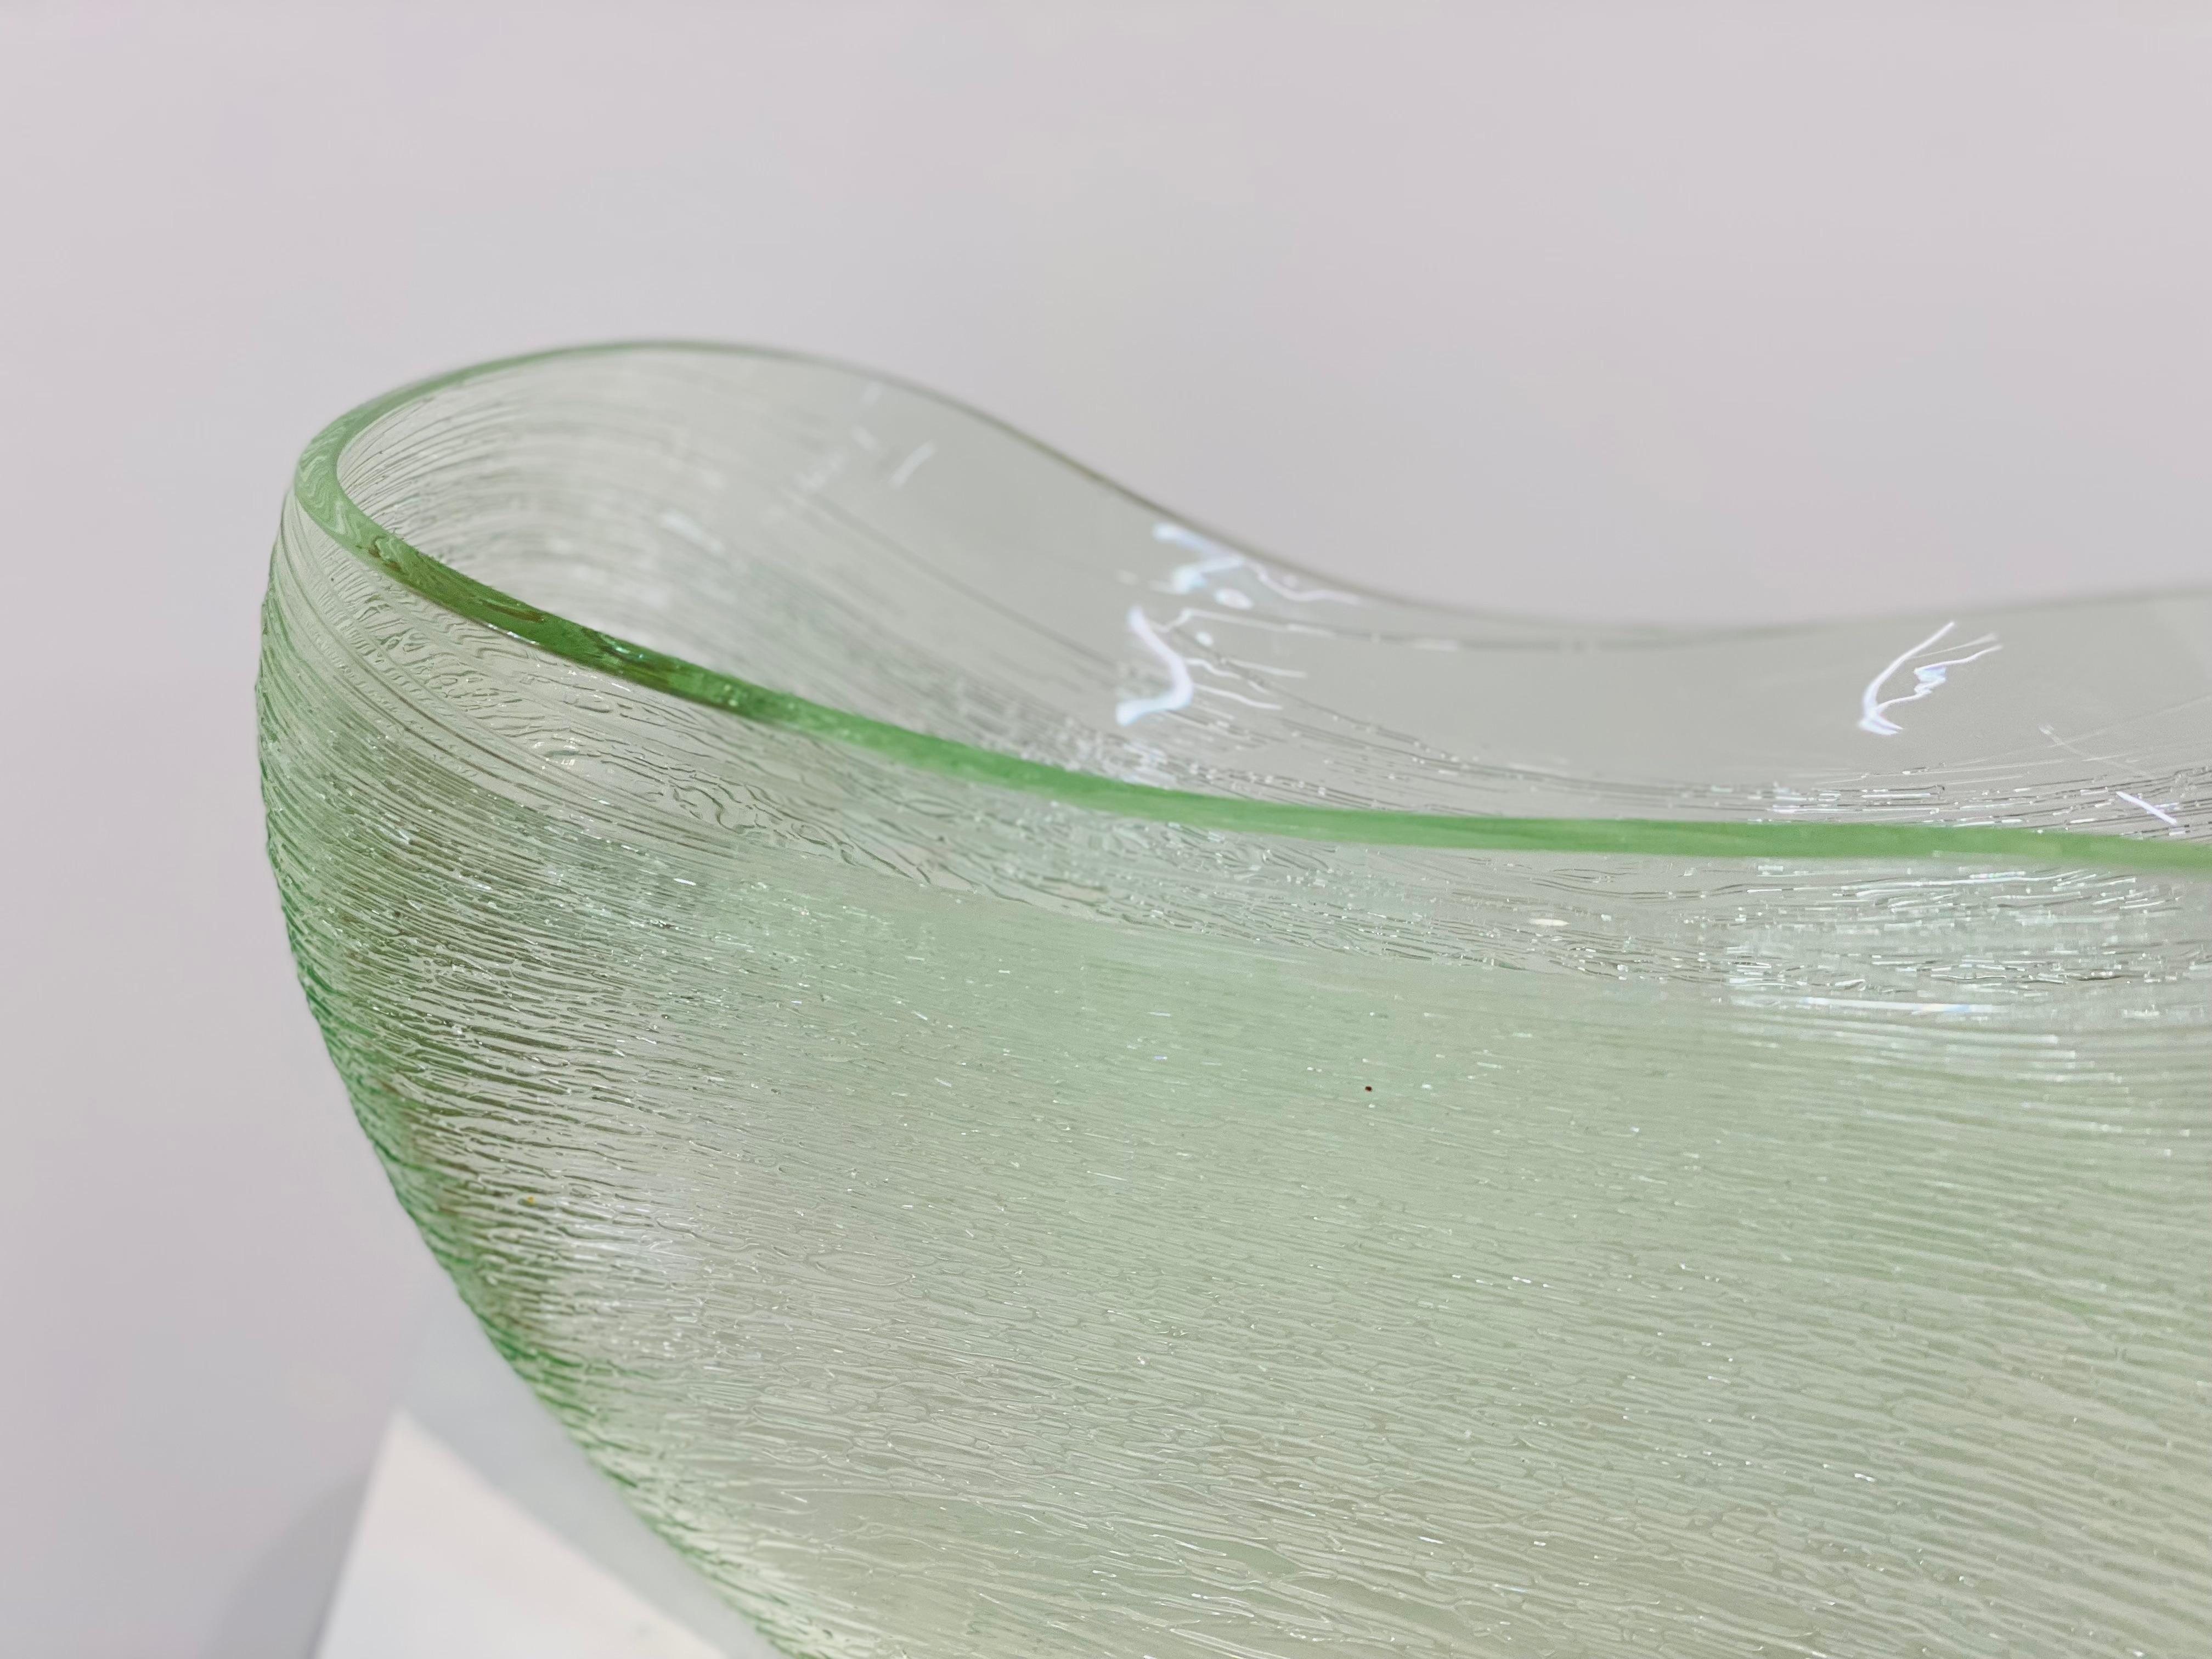 Oval Fluid Form, green- 21st Century Blown Glass Object  - Gray Abstract Sculpture by Bibi Smit